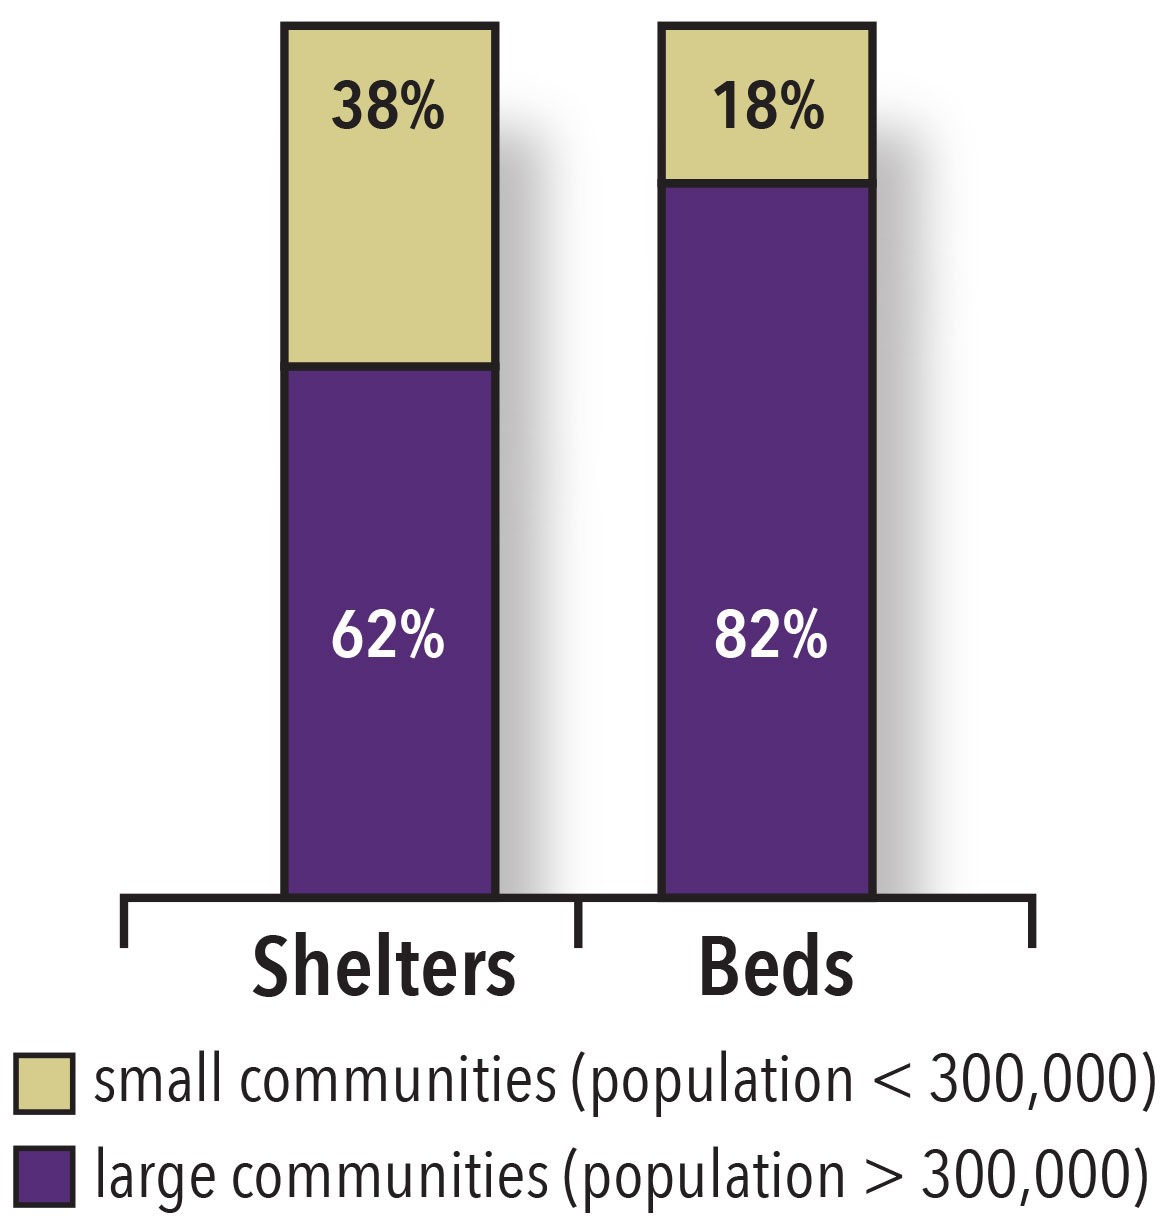 Comparison of the ratio of emergency shelters and permanent shelter beds between large and small communities in Canada.